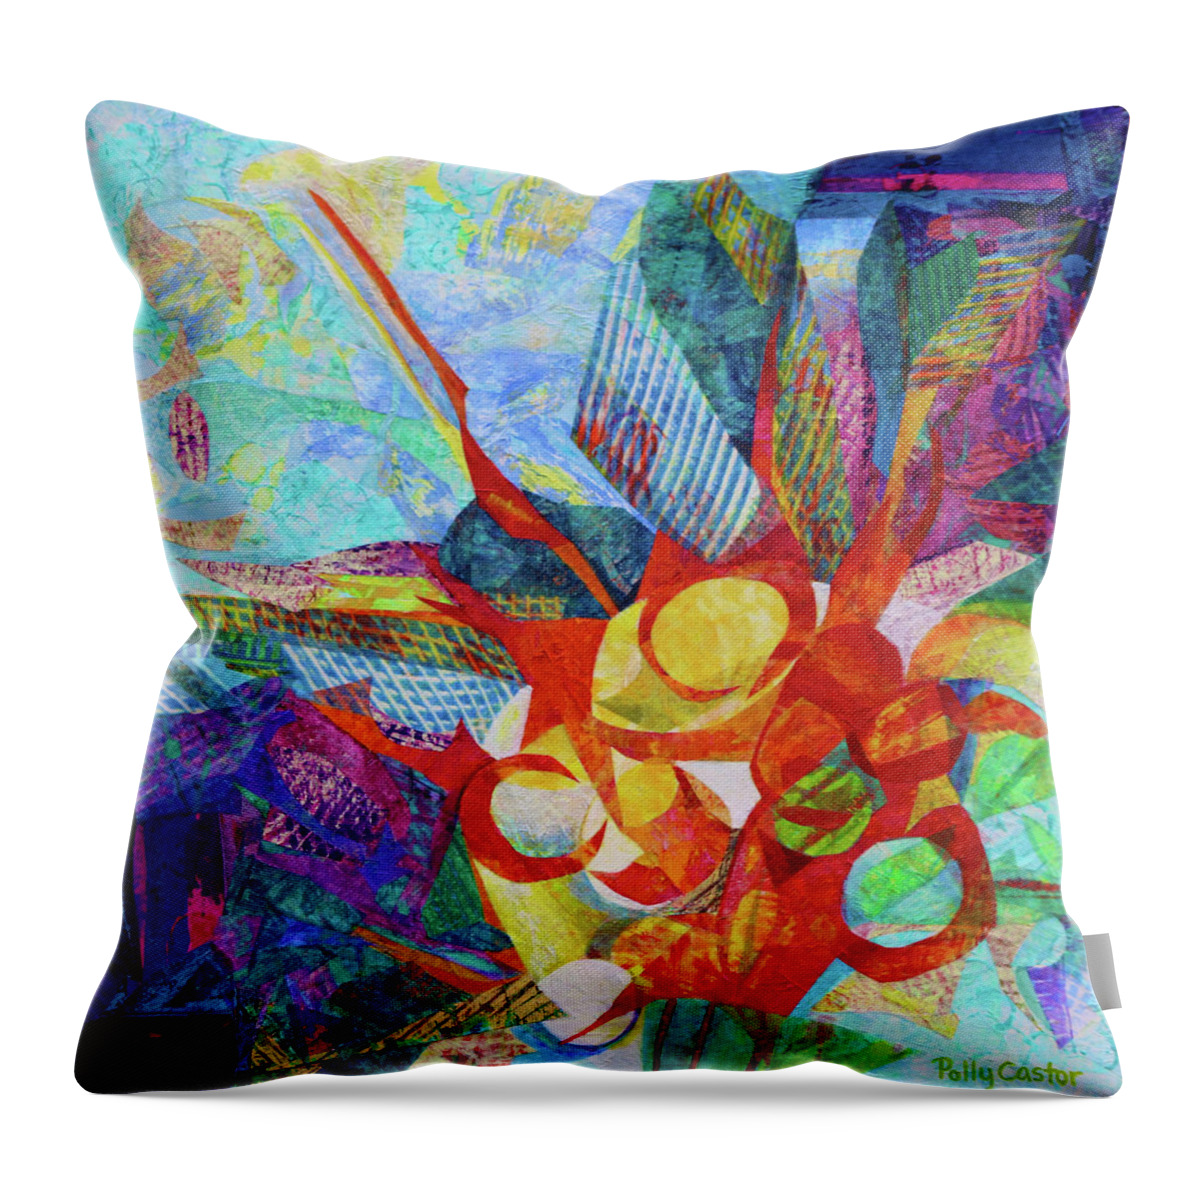 Vital Life Force Throw Pillow featuring the painting Qi by Polly Castor